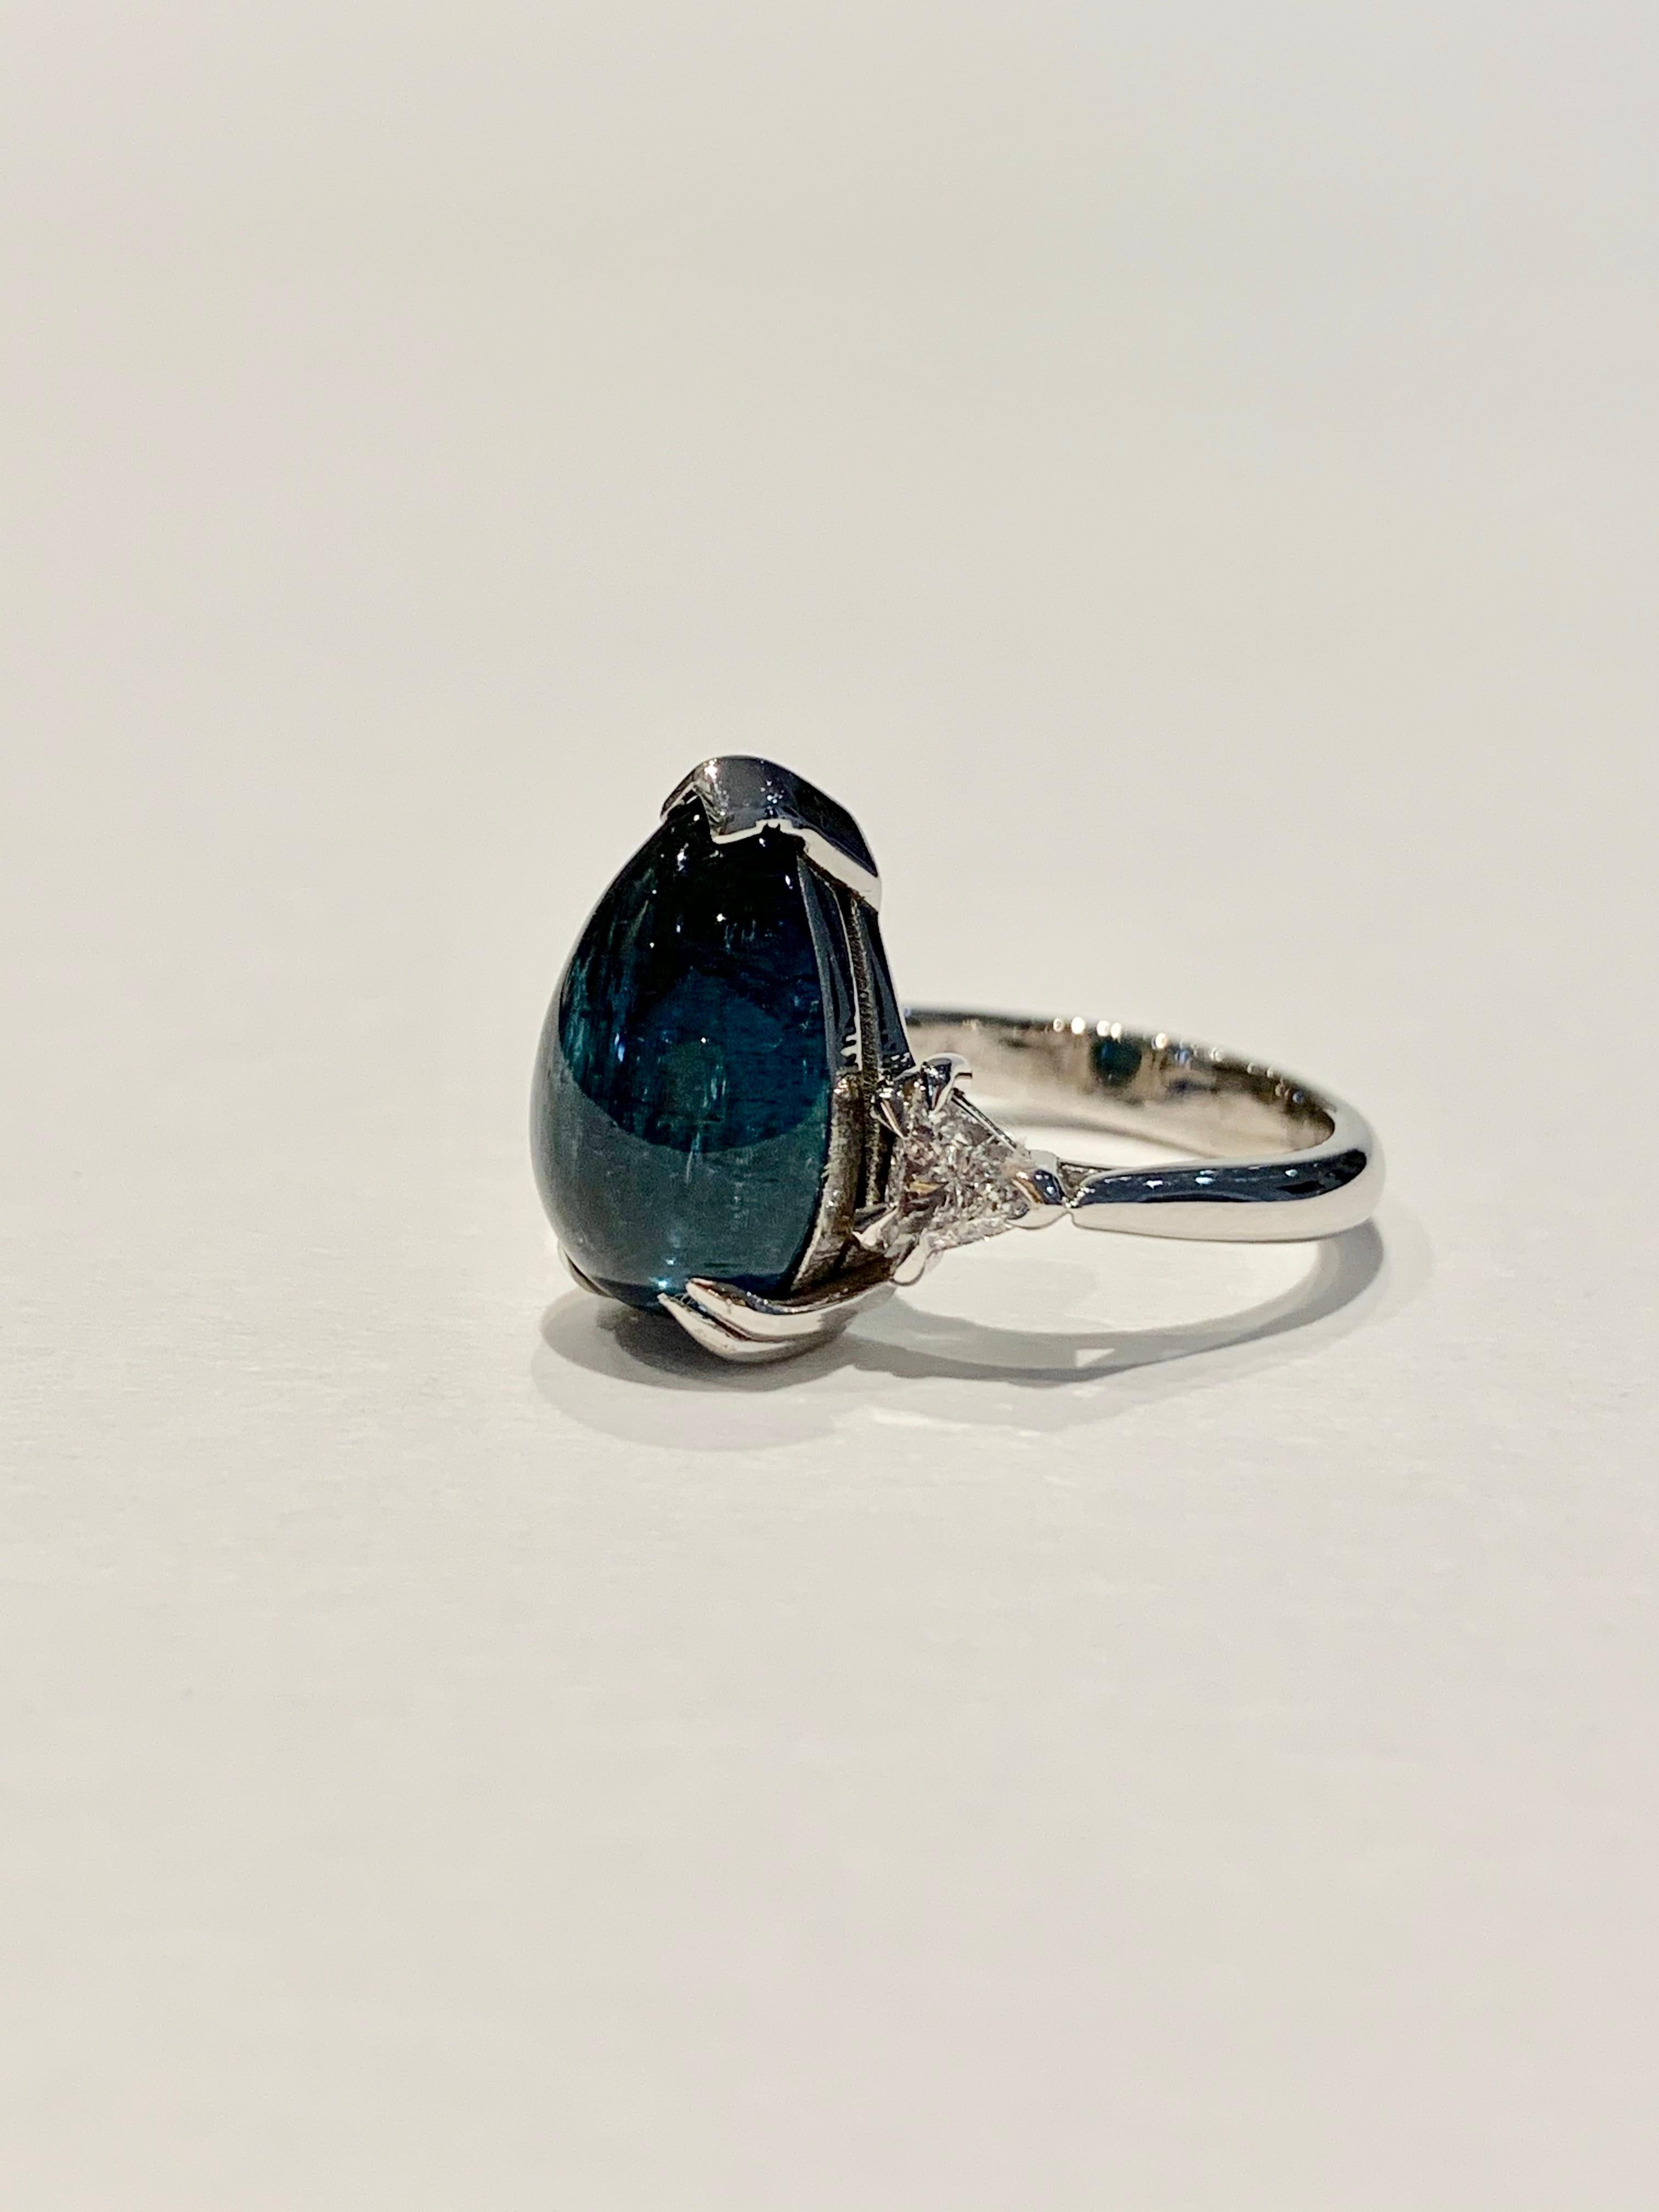 This amazing blue Tourmaline* pear cut cabochon* is eye clean and set in a double claw design in 18ct White Gold.  A BESPOKE design using a CAD  to ensure this stone was presented as its best.  The ring also has 2 x .20 Trillion Cut diamonds as